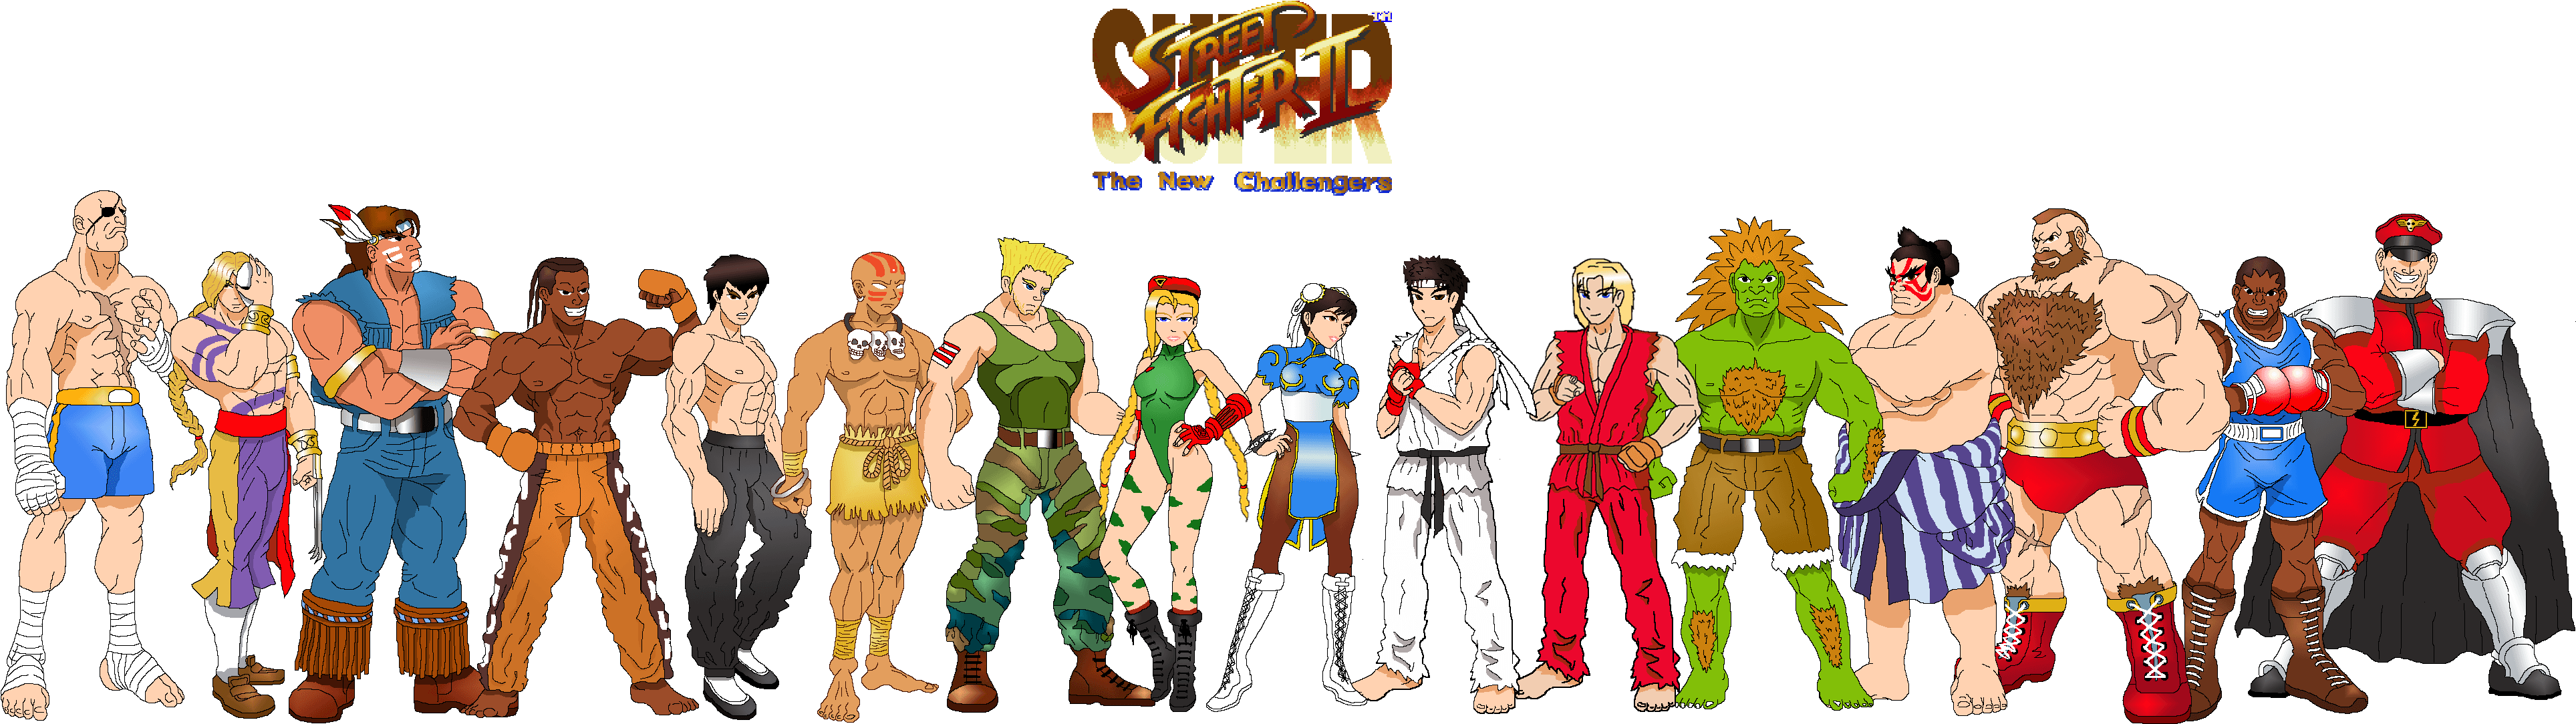 Download Street Fighter 2 Wallpaper Fighter Character